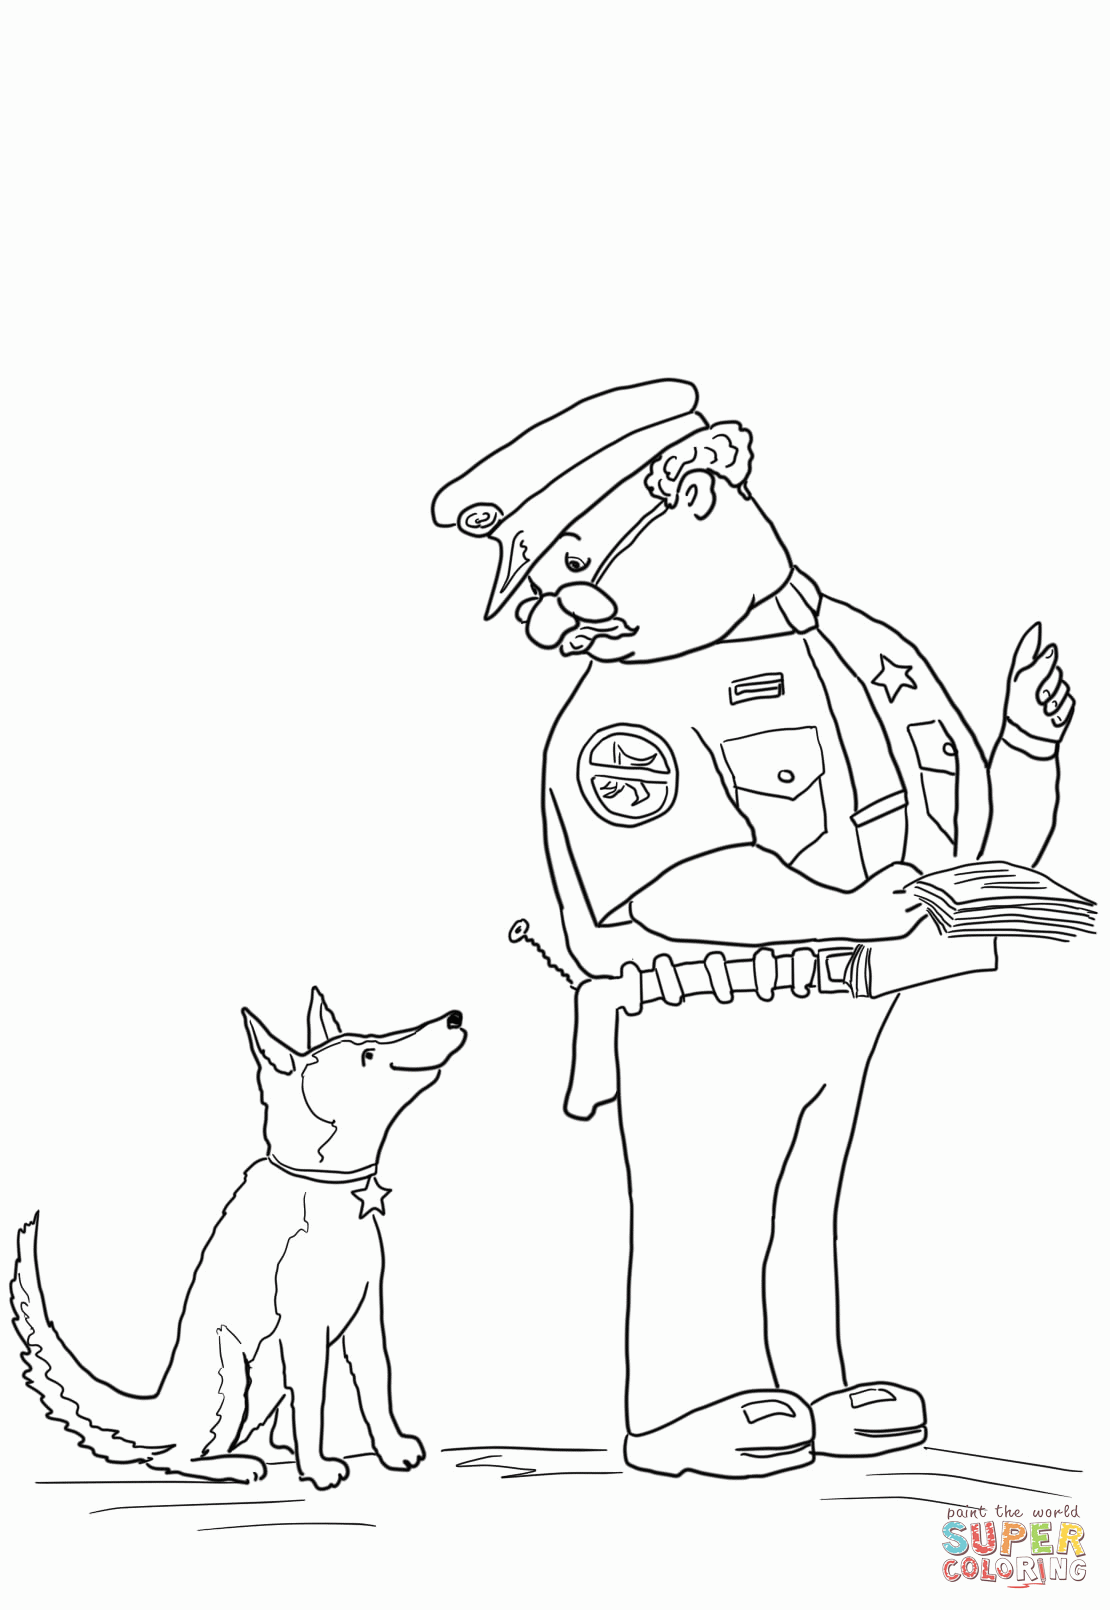 Officer Buckle and gloria with paper work coloring page